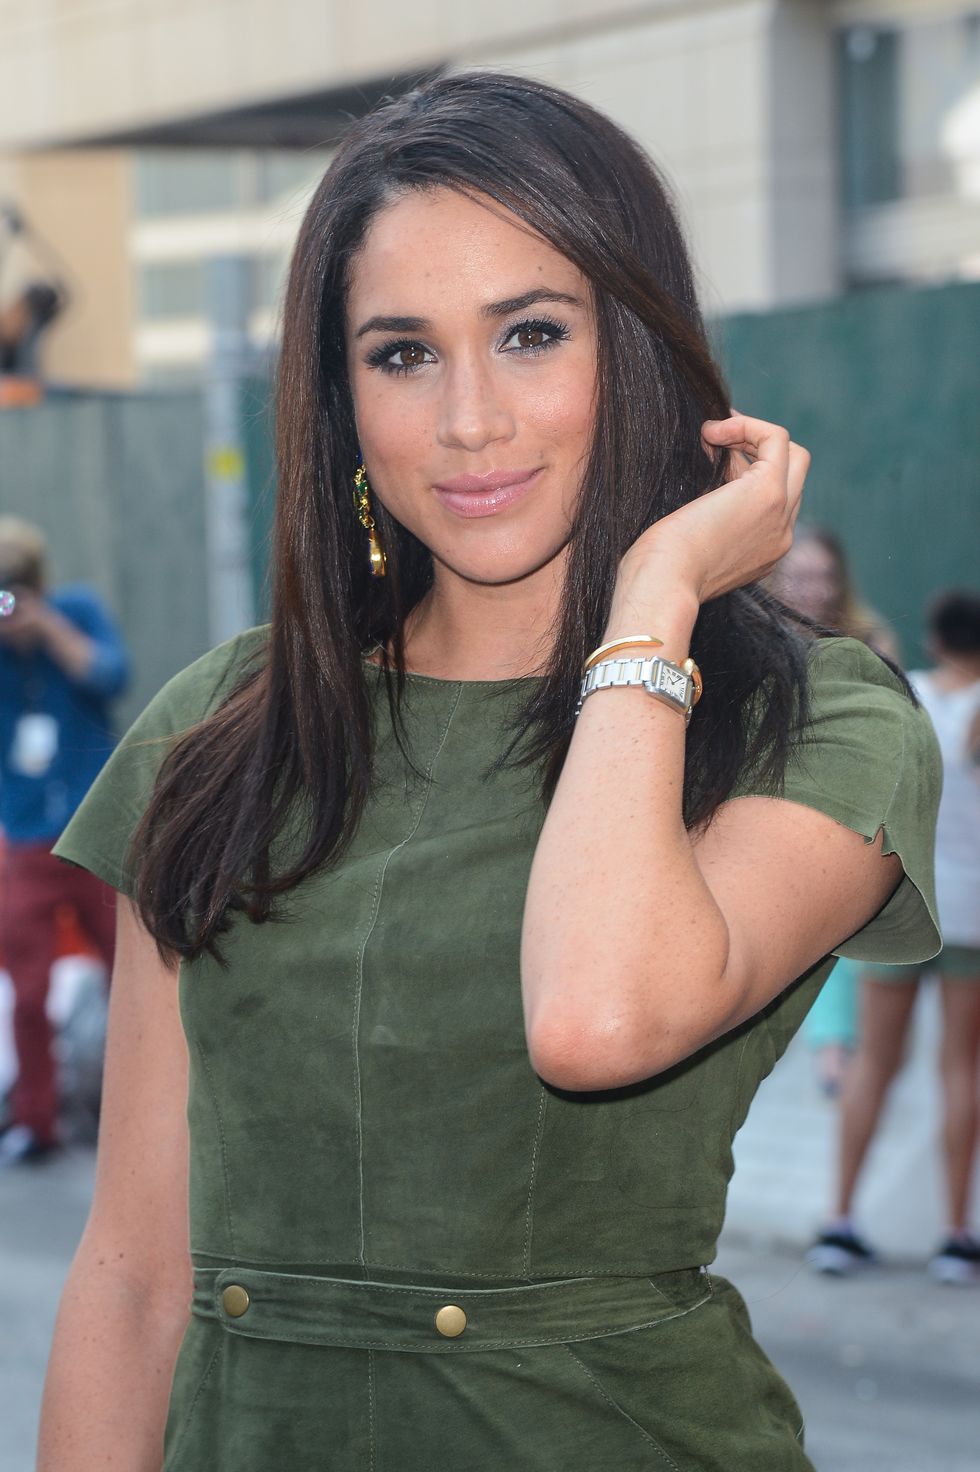 new york, ny   september 11  actress meghan markle enters the mercedes benz fashion week at lincoln center for the performing arts on september 11, 2013 in new york city  photo by ray tamarragetty images